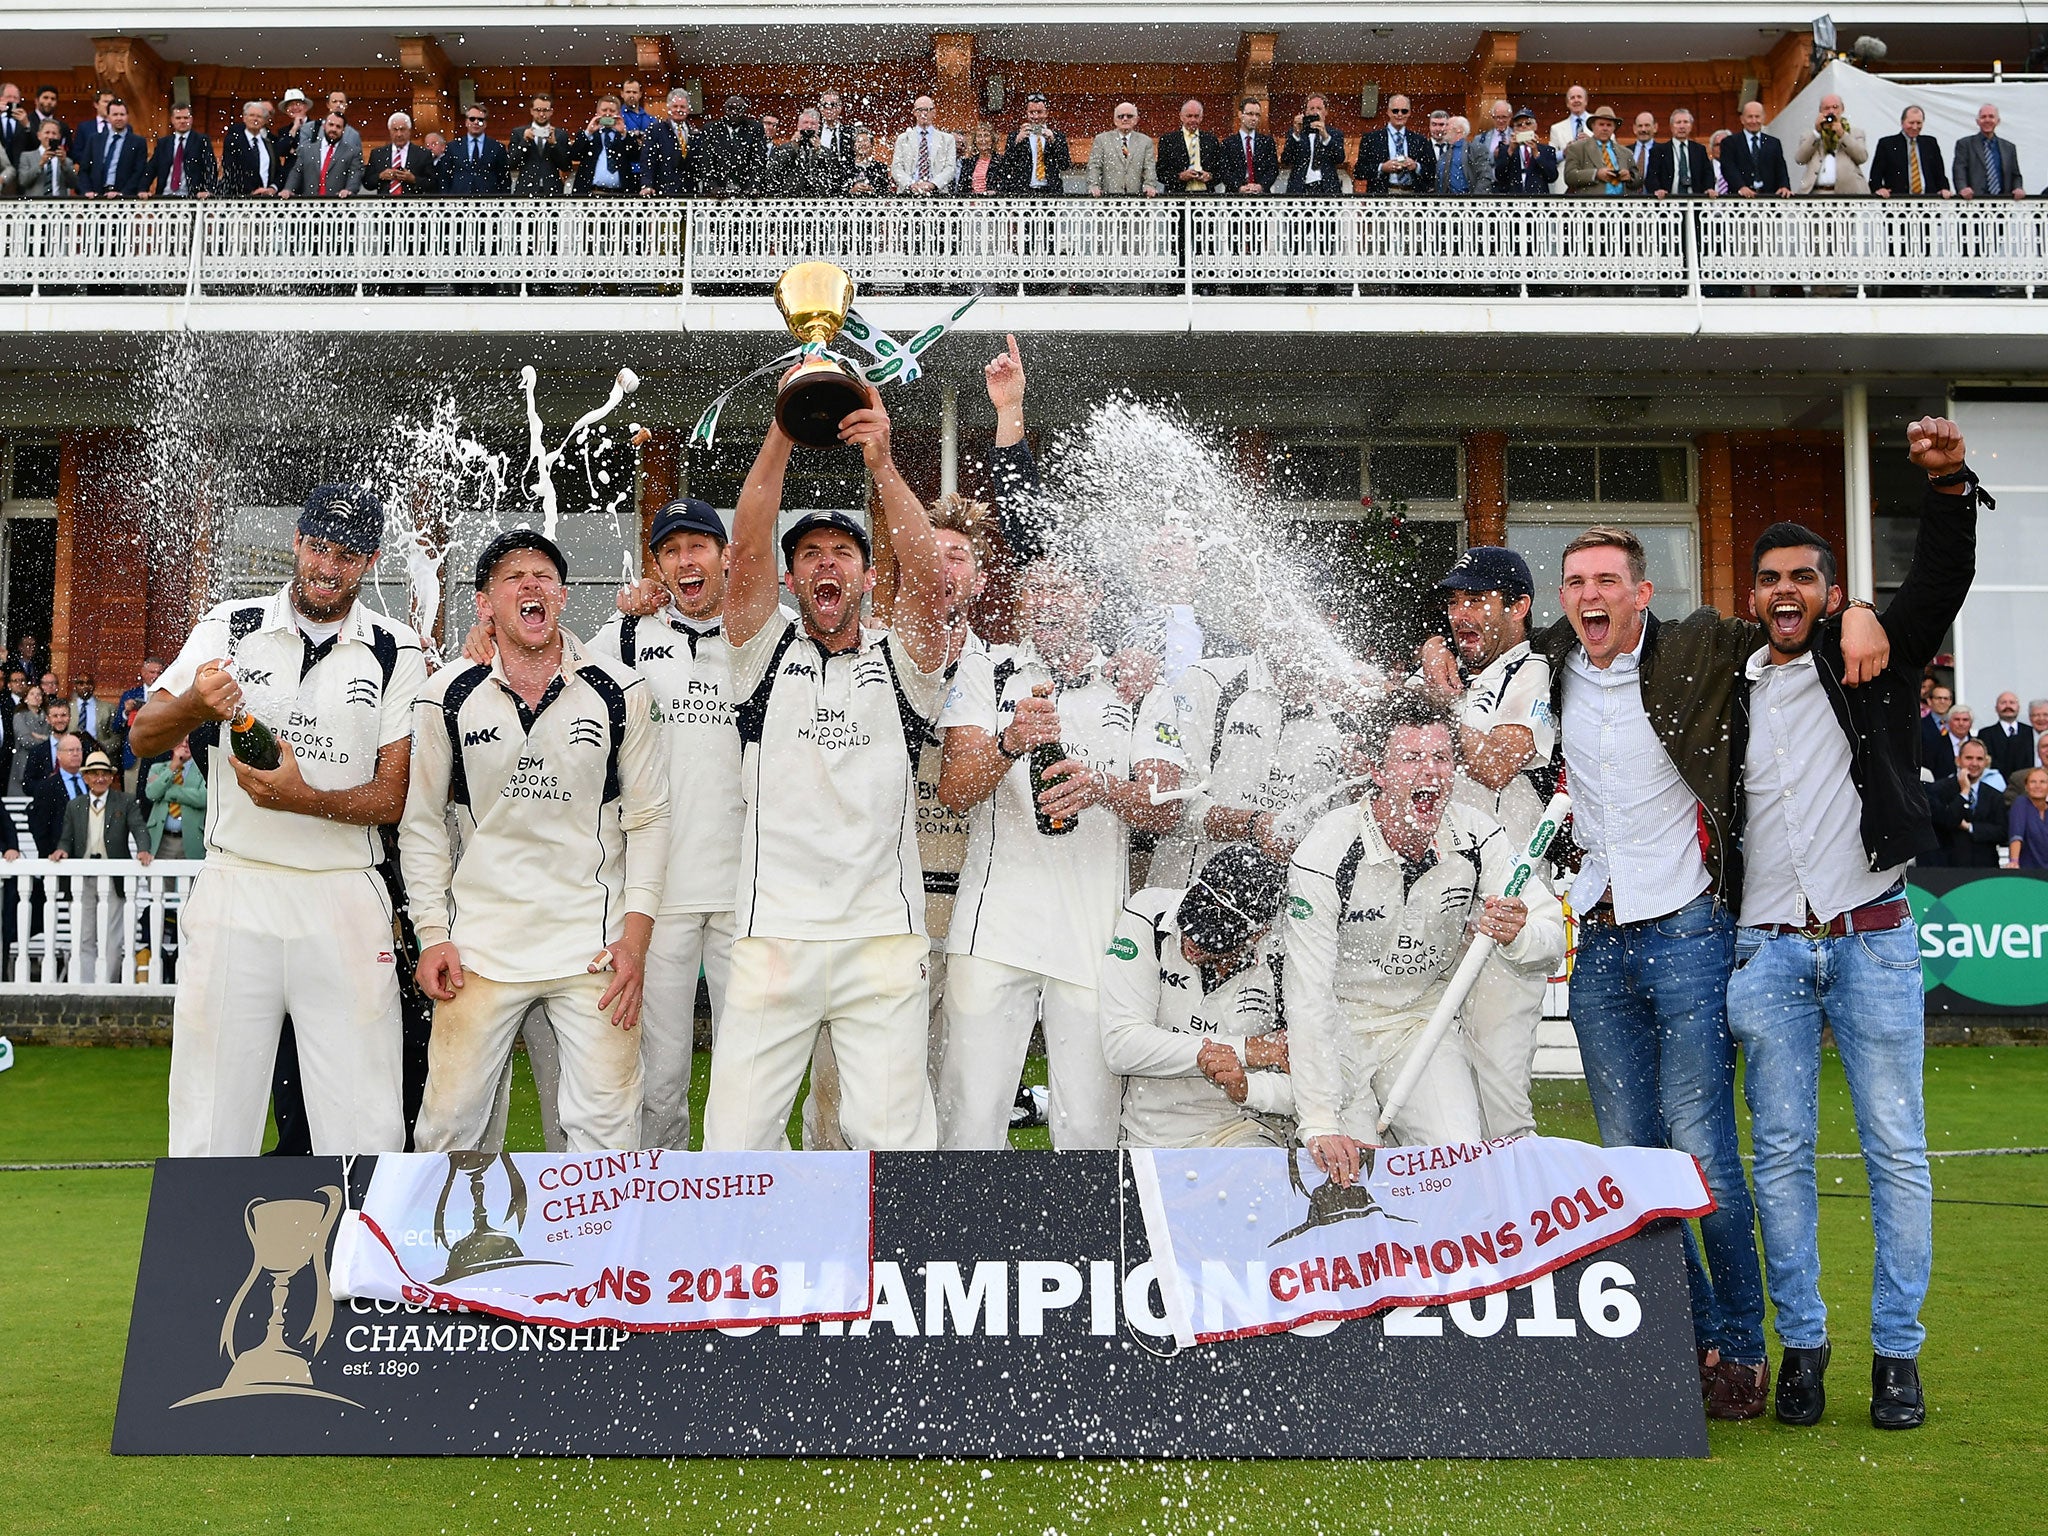 Middlesex lifted last year's County Championship trophy after a 23-year wait